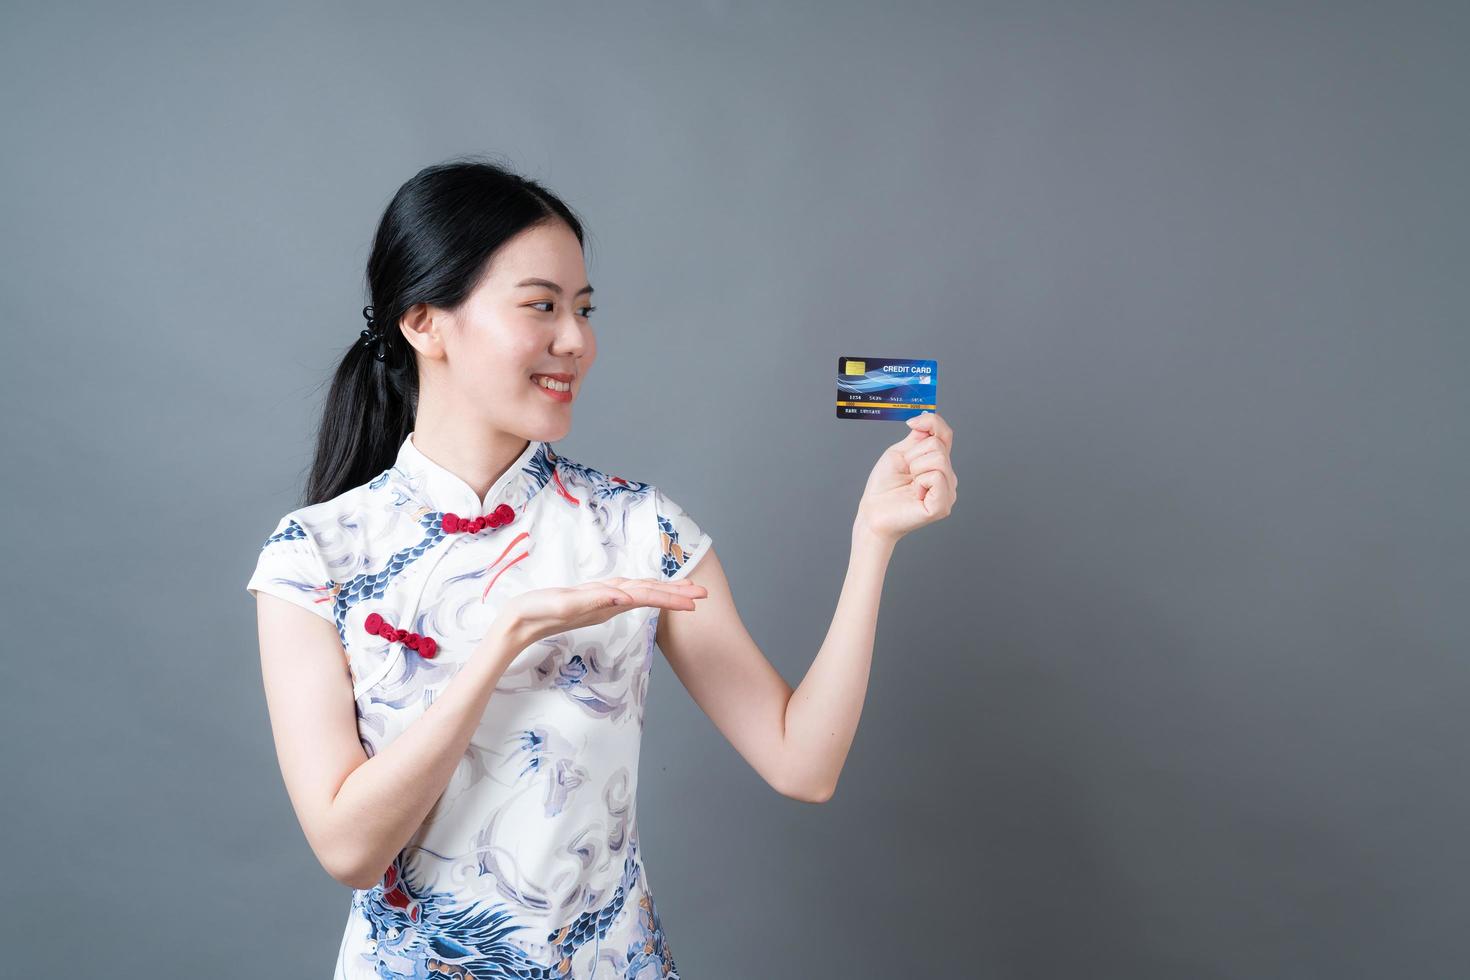 Asian woman wear Chinese traditional dress with hand holding credit card photo